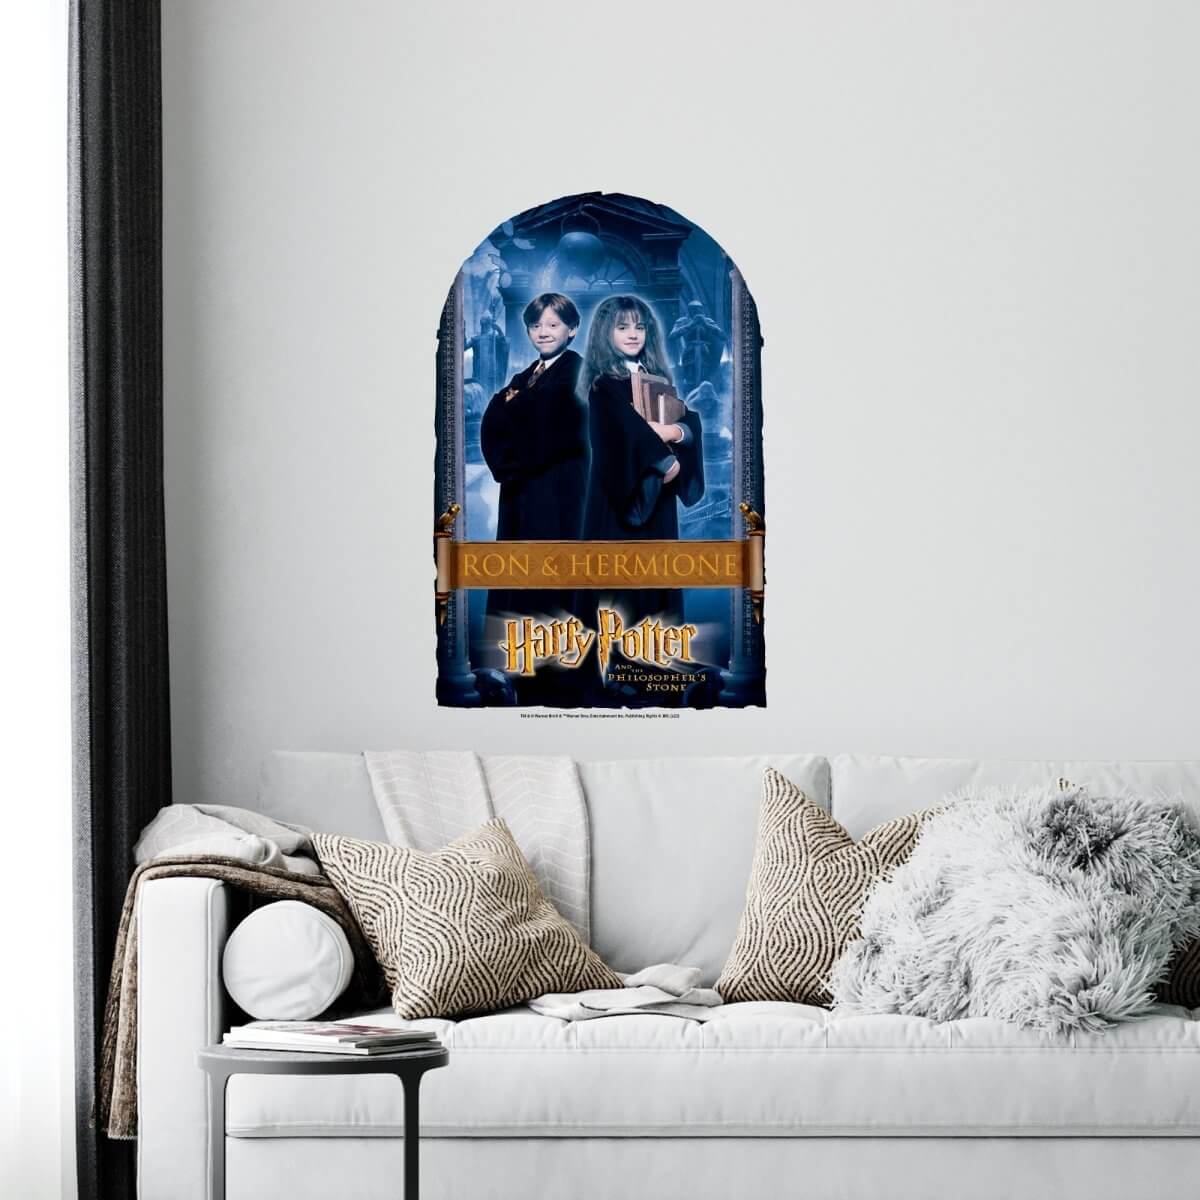 Harry Potter Ron & Hermione Poster Licensed Wall Decal